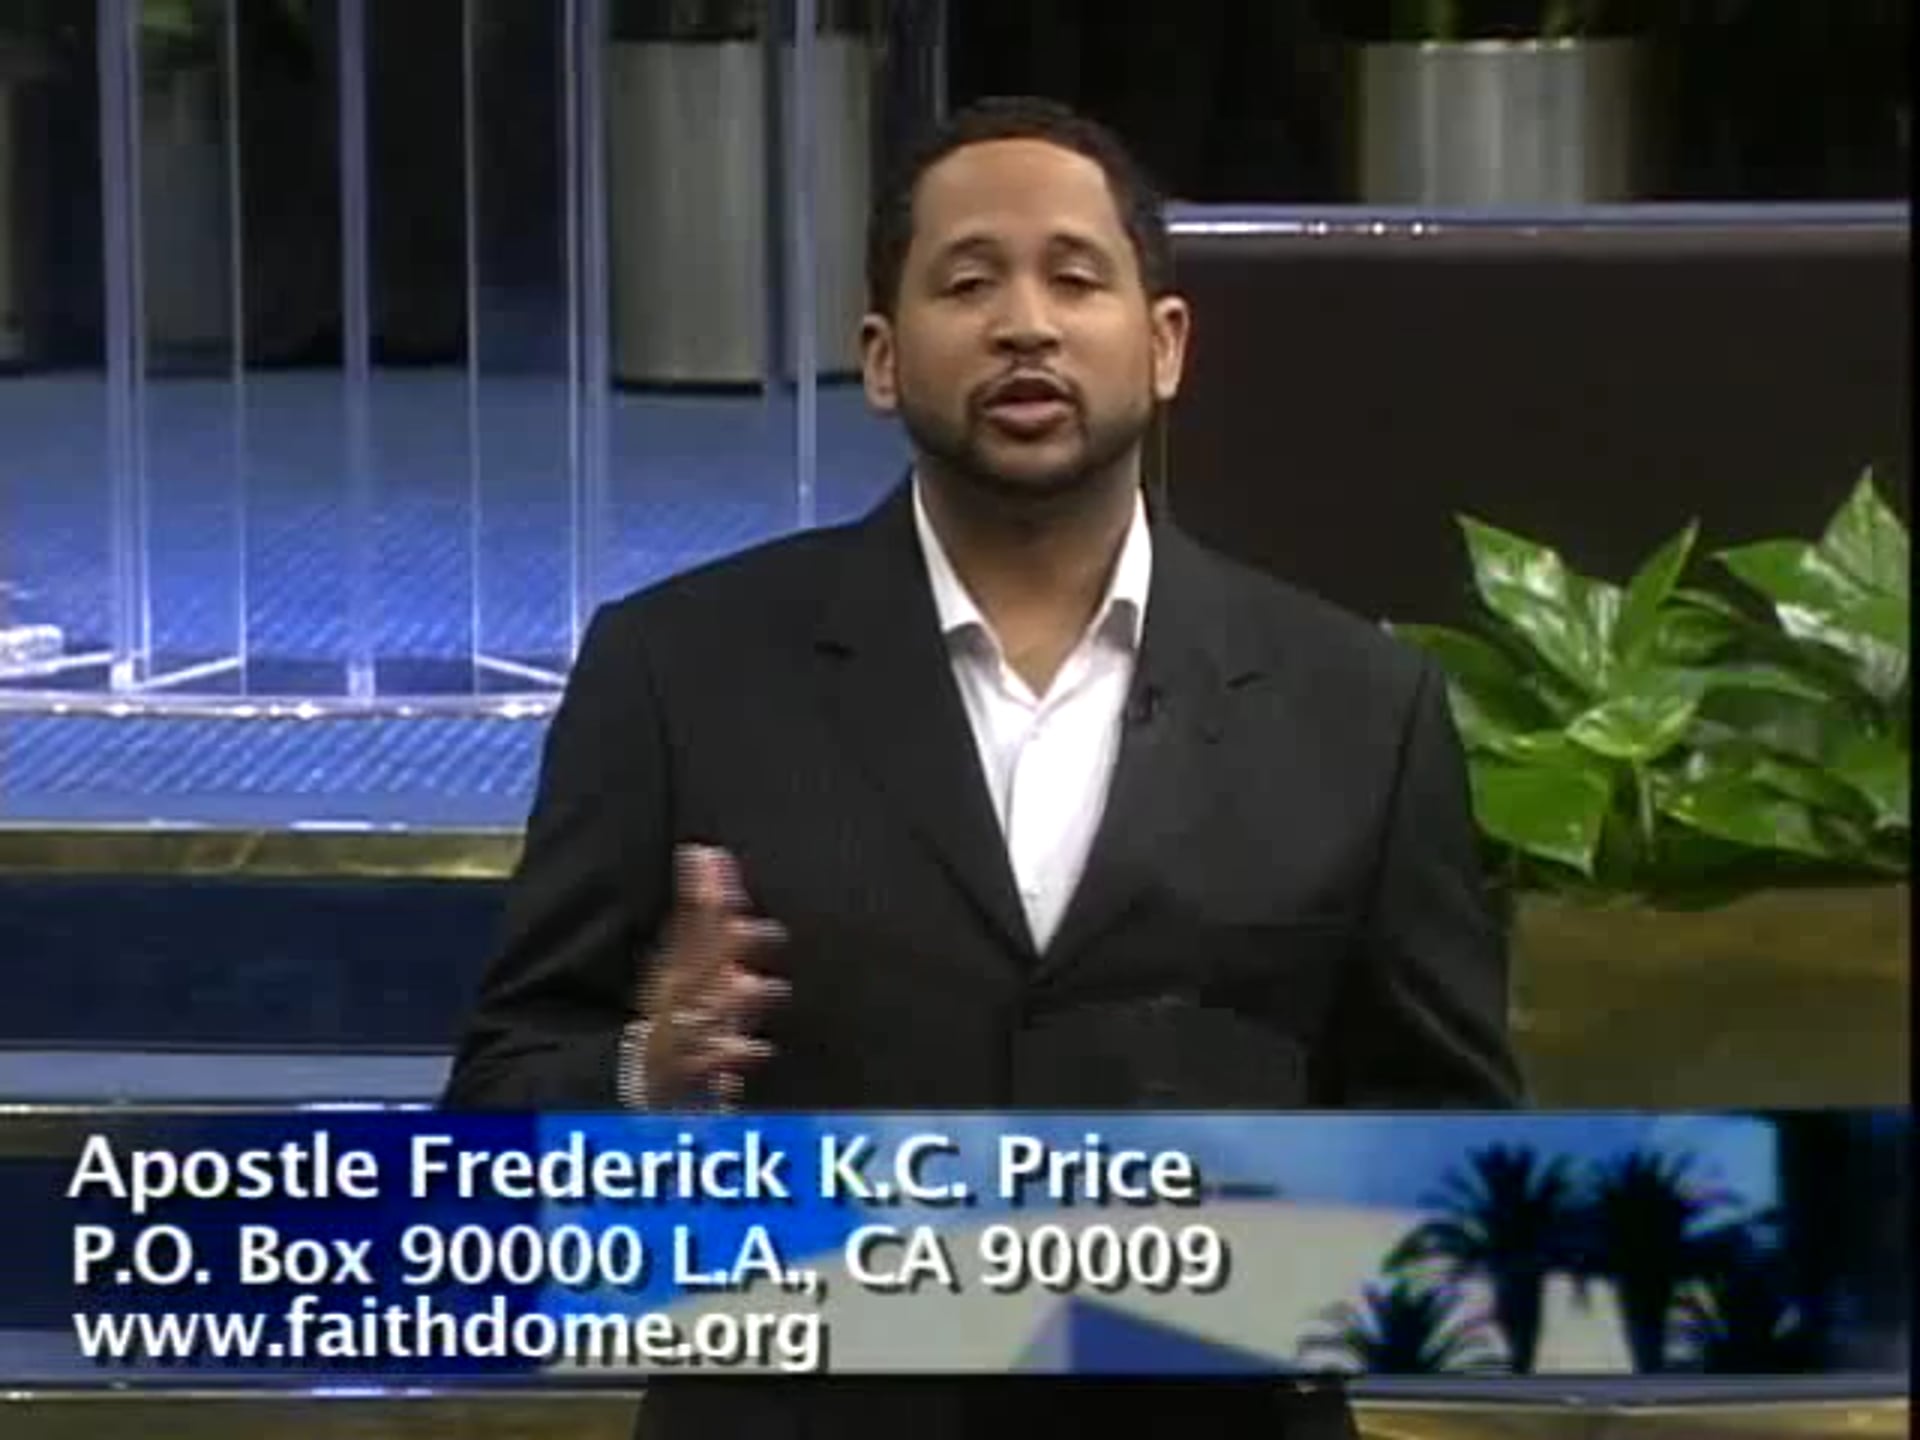 youtube pastor fred price jr stepping down